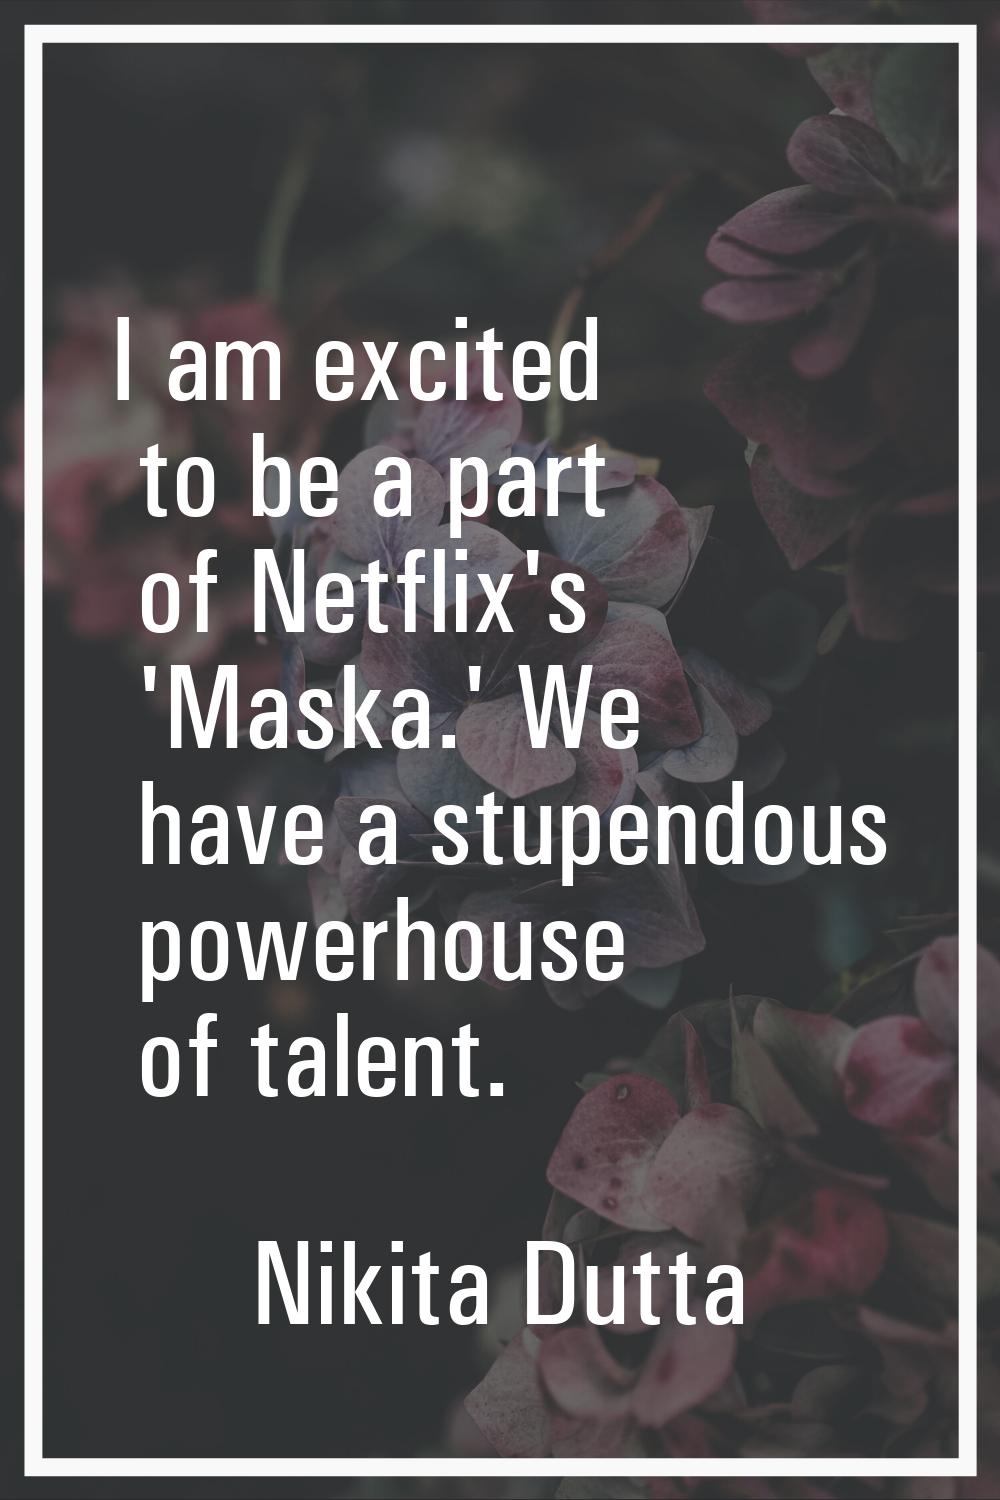 I am excited to be a part of Netflix's 'Maska.' We have a stupendous powerhouse of talent.